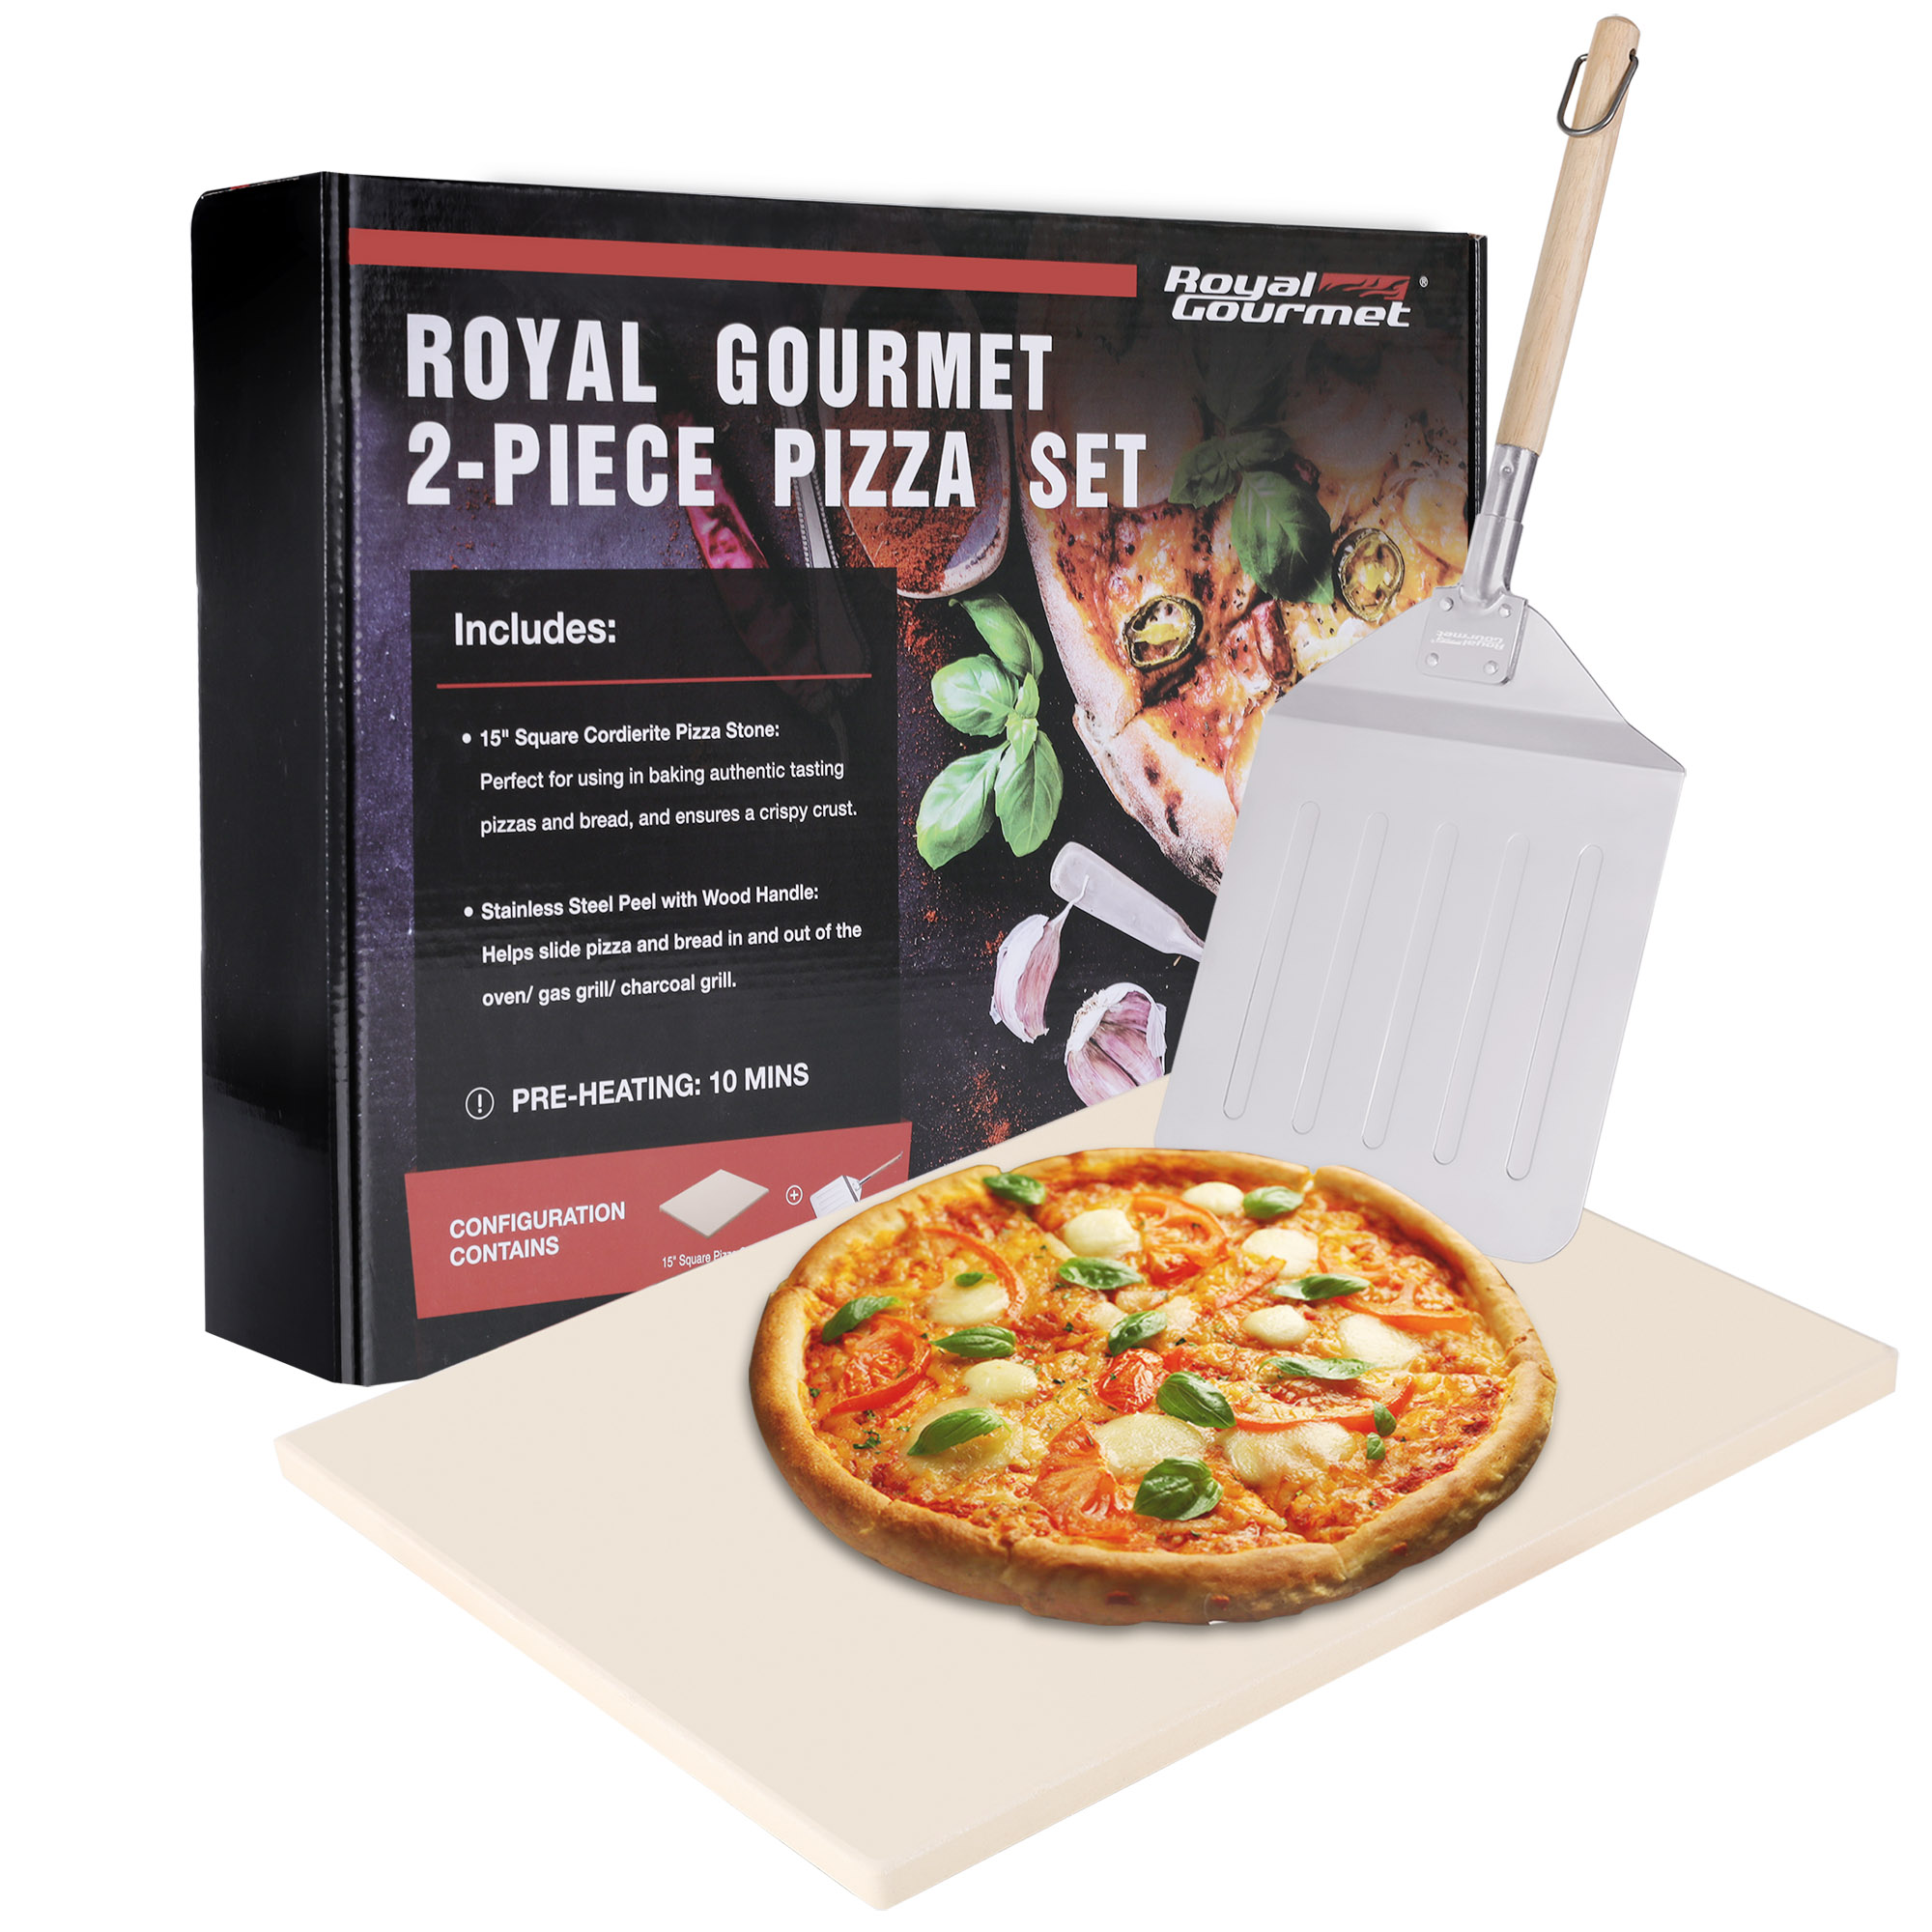 Royal Gourmet KSF1507 15" 2-Piece Pizza Stone Set for Grill and BBQ - image 1 of 8